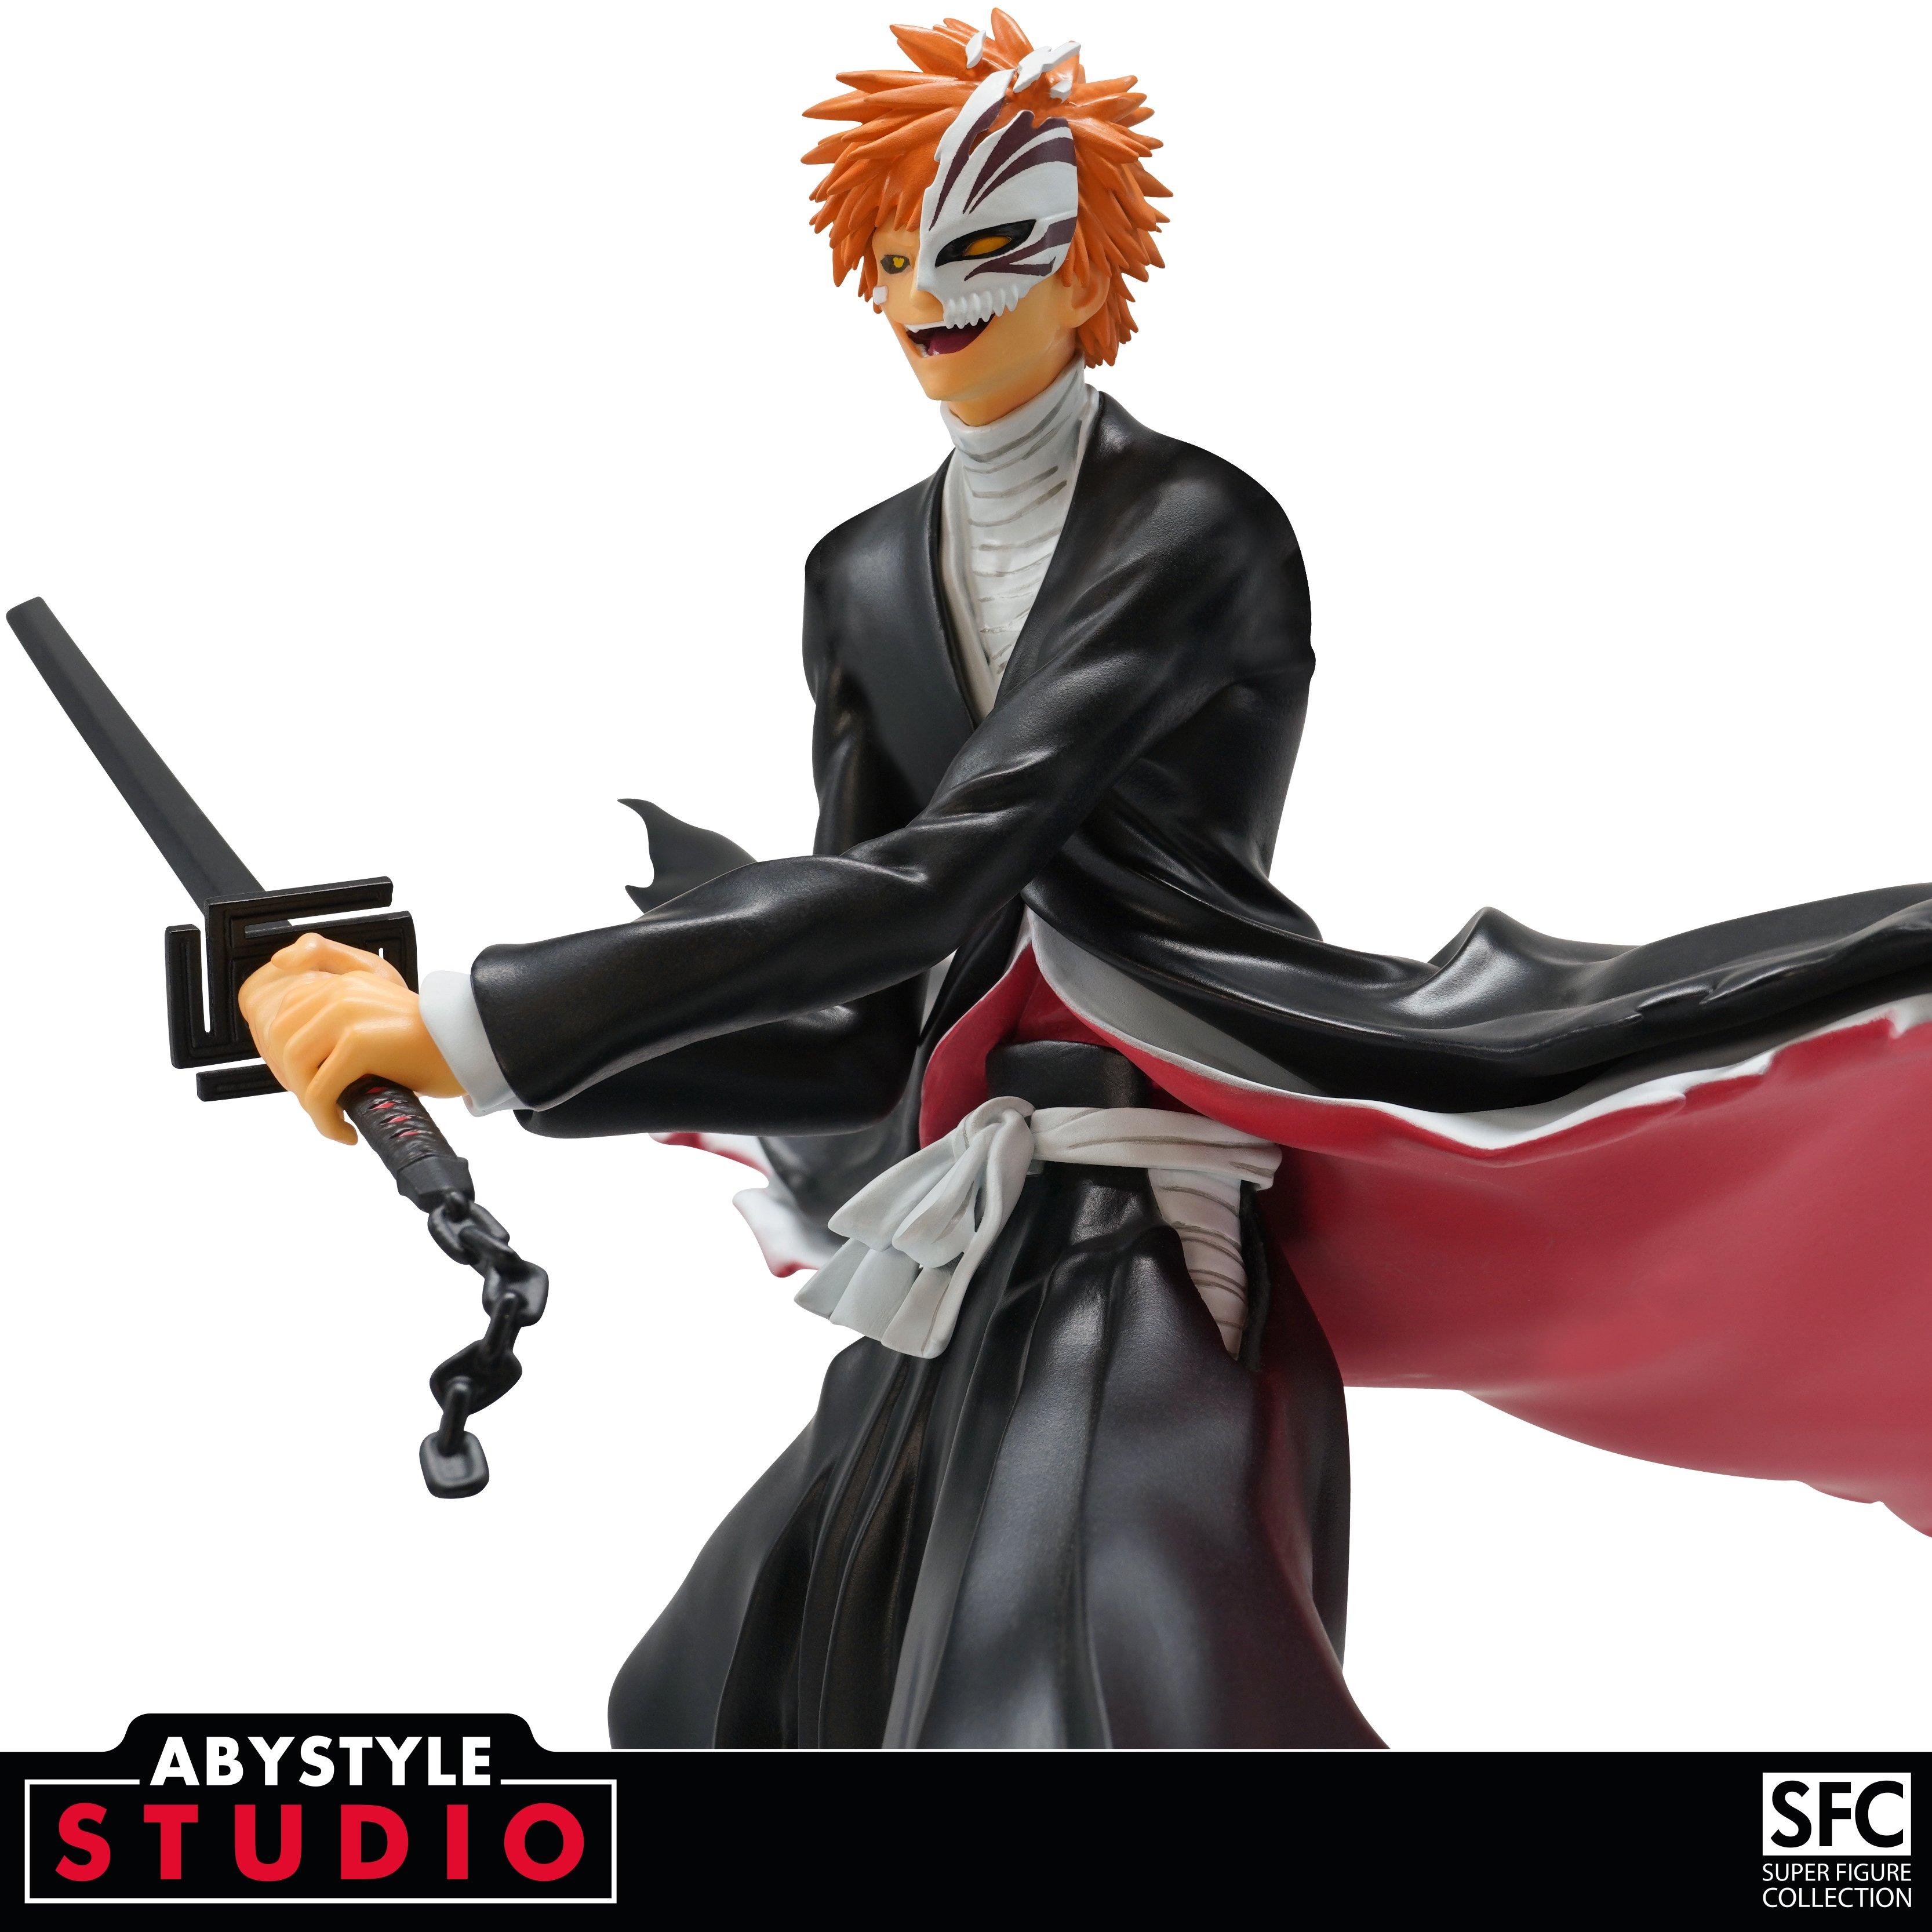  ABYSTYLE Studio Bleach Ichigo 7.5 Tall SFC Collectible PVC  Figure Statue Anime Manga Figurine Home Room Office Décor Gift : Toys &  Games